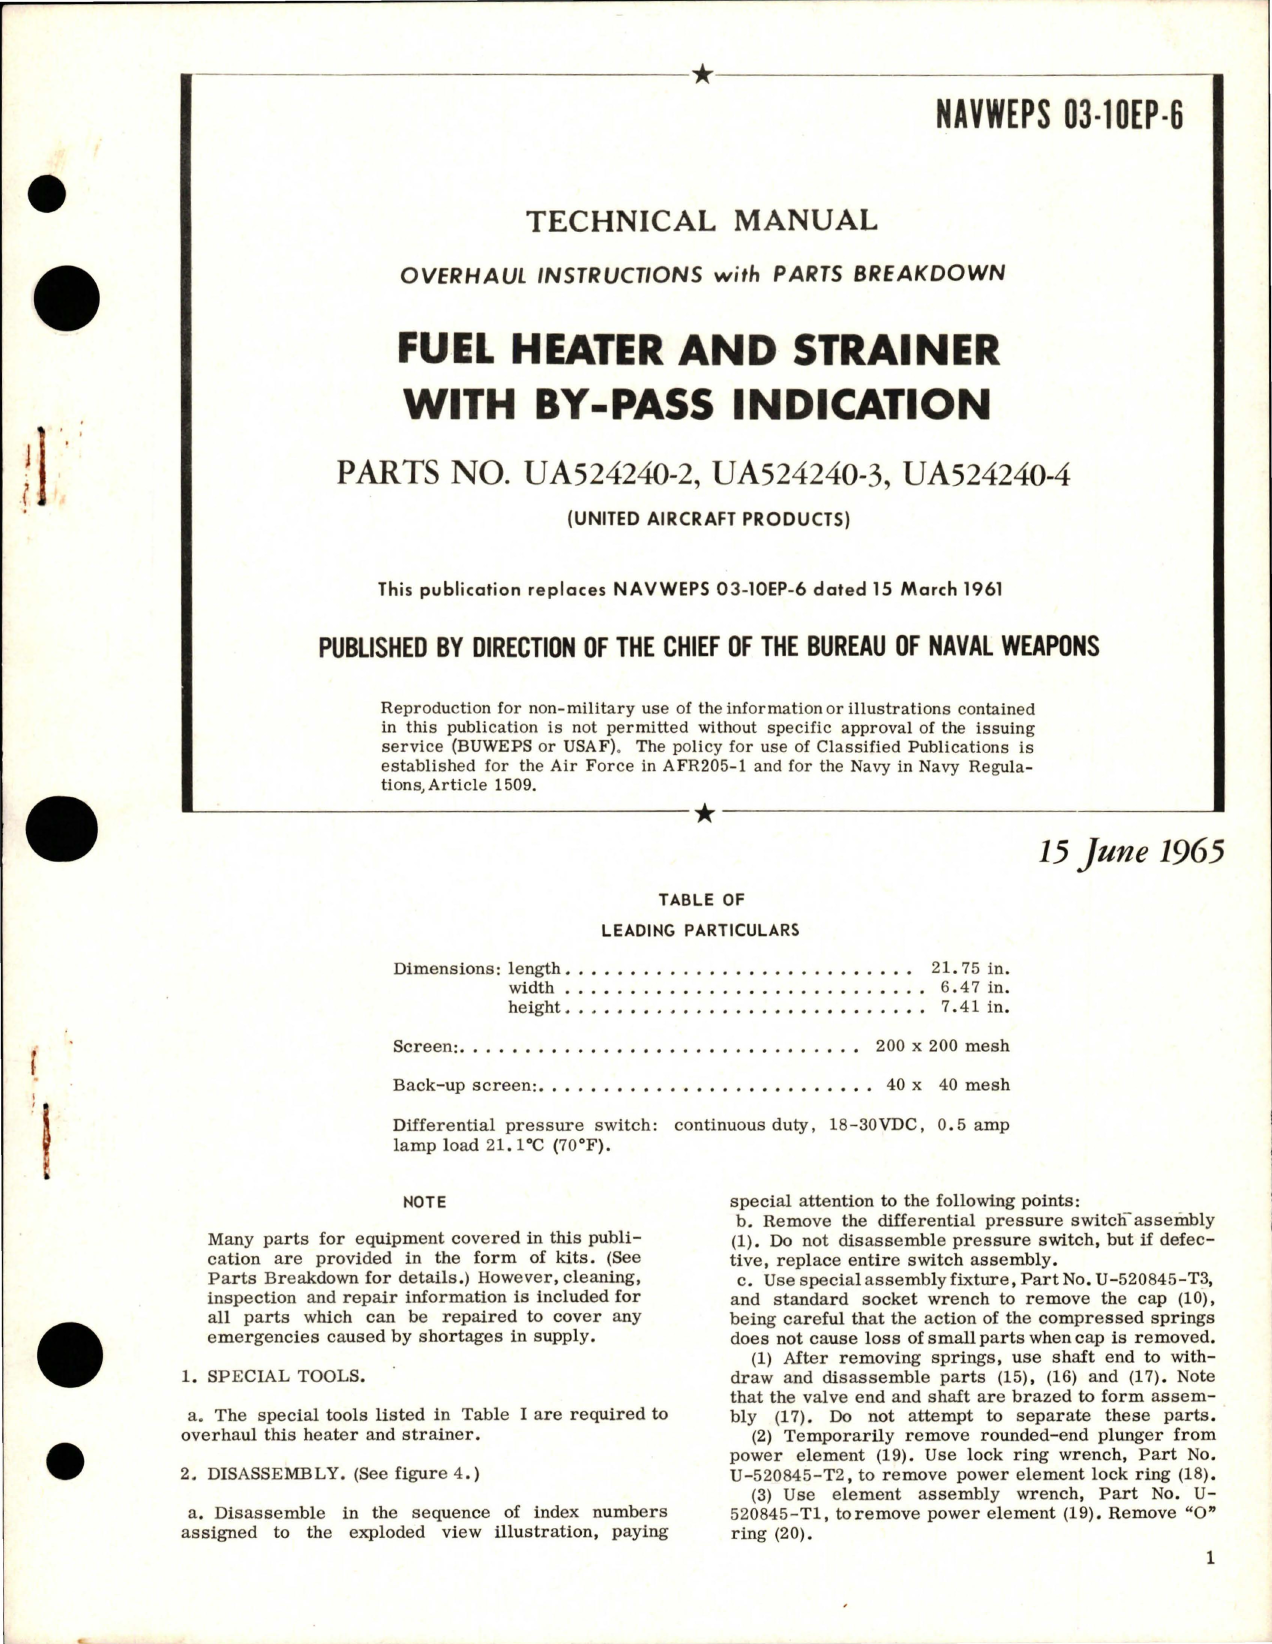 Sample page 1 from AirCorps Library document: Overhaul Instructions with Parts Breakdown for Fuel Heater and Strainer with By-Pass Indication - Parts UA524240-2, UA524240-3, and UA-524240-4